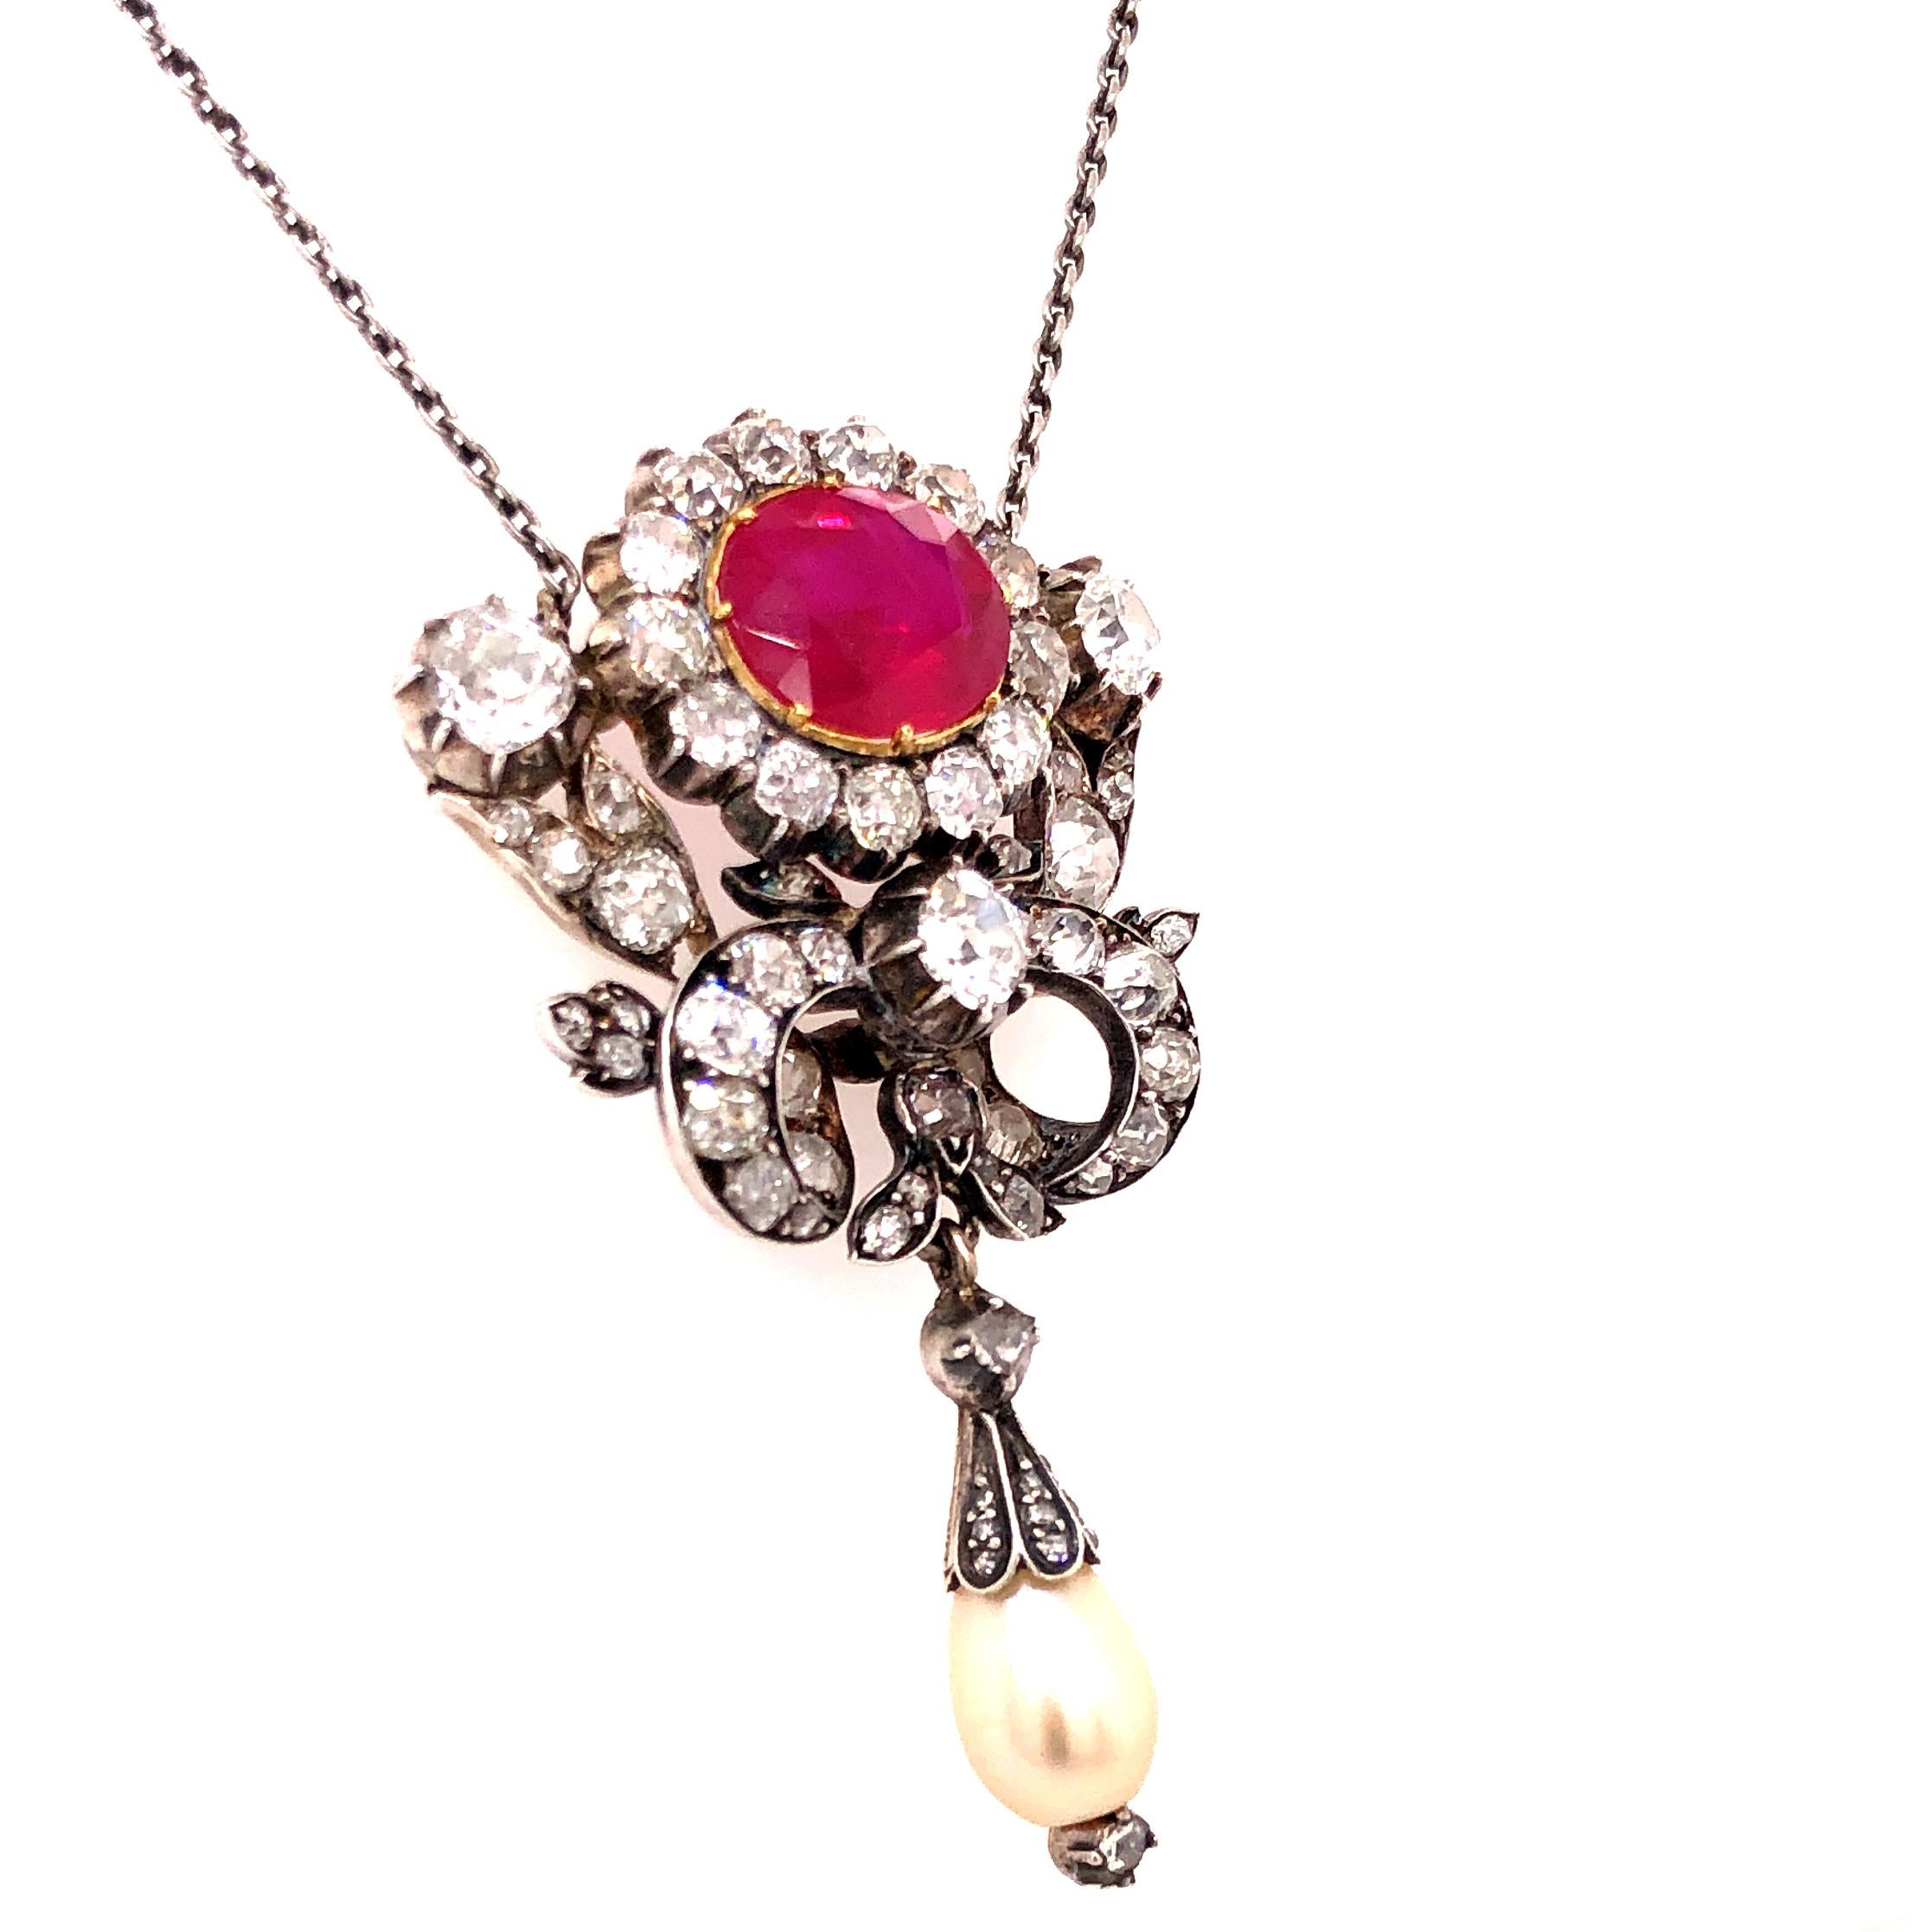 An important Victorian pendant with a ruby, diamond and a pearl, 1880s. The big centre stone is a rare natural and not heat treated Burmese ruby weighing 4.32 carats, certified by a Swiss gemological laboratory (SSEF), with a stunning red colour.